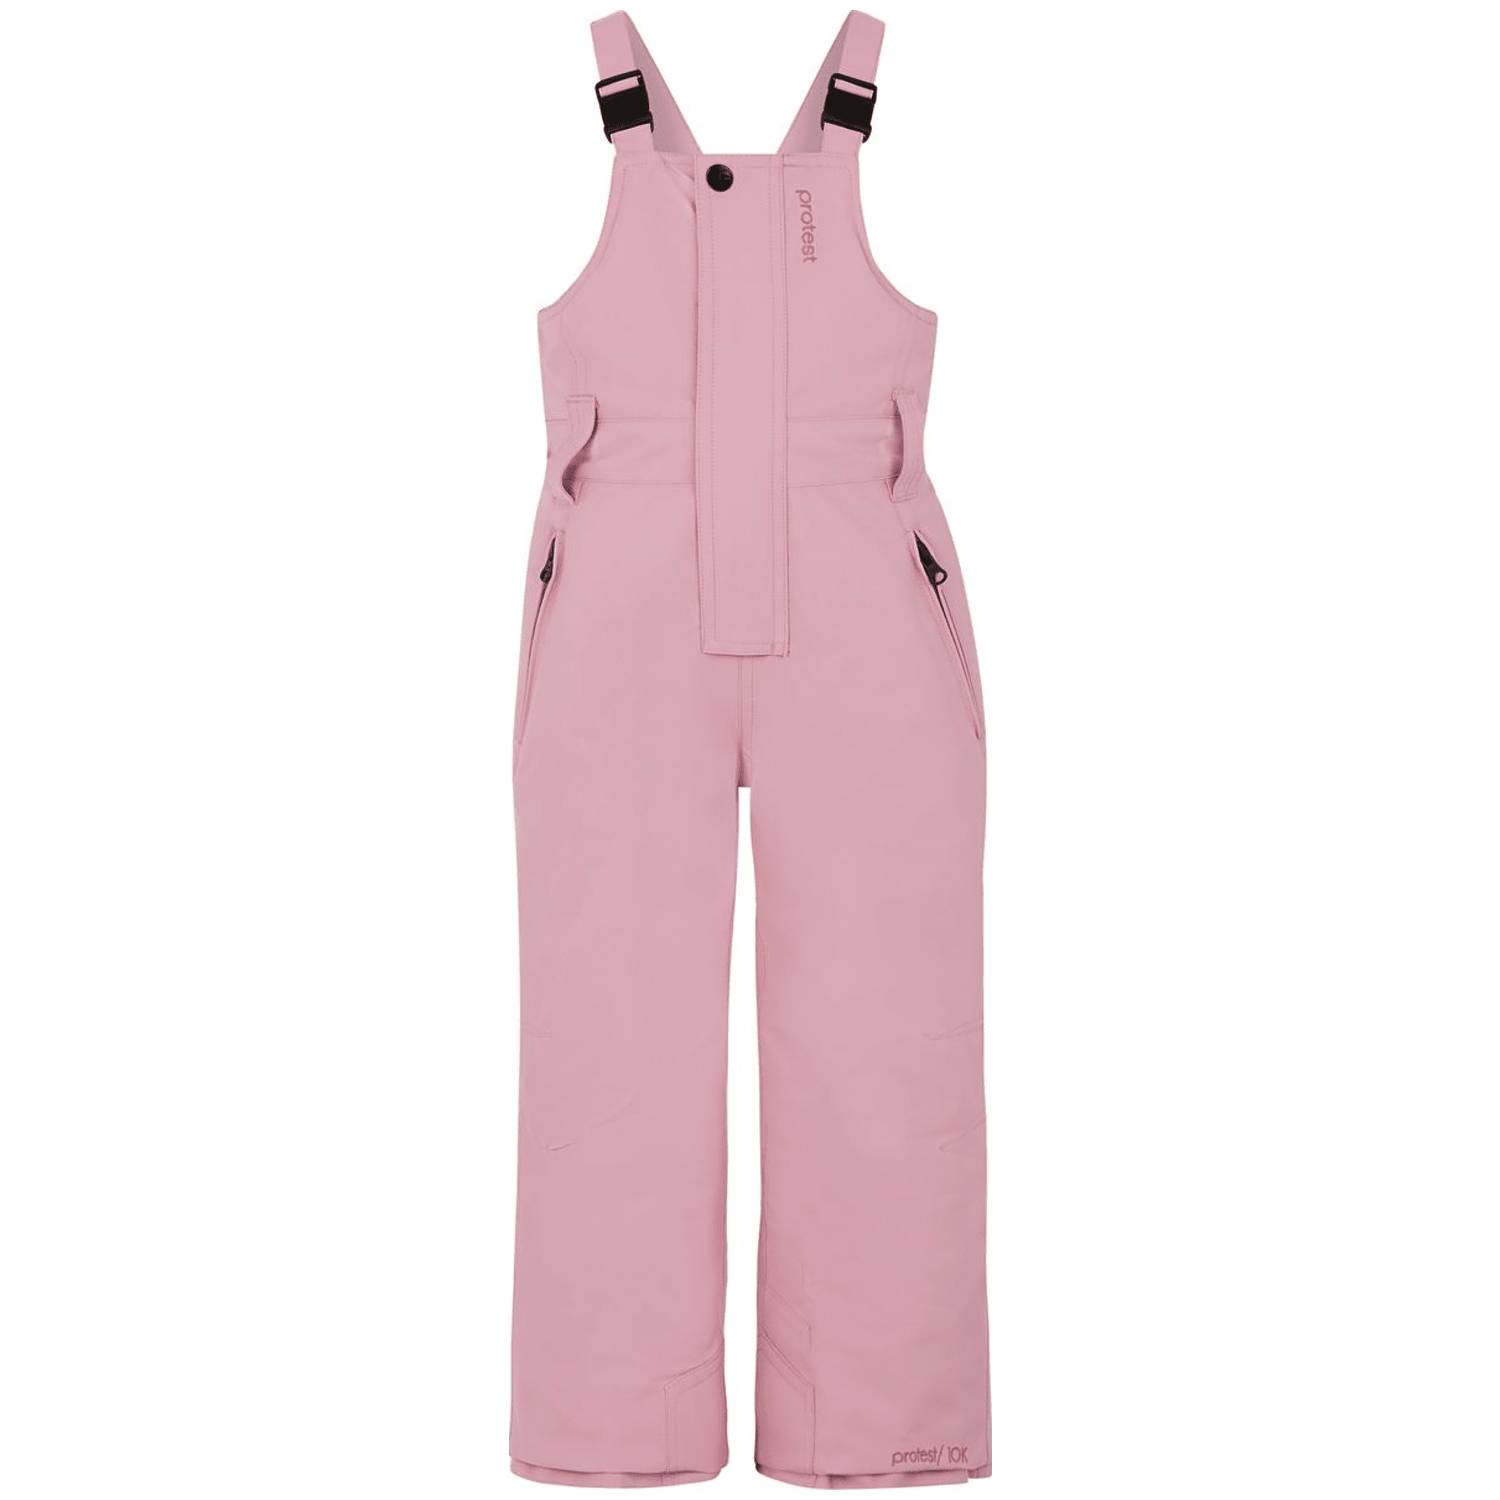 Protest Neutral Kinder Skioverall